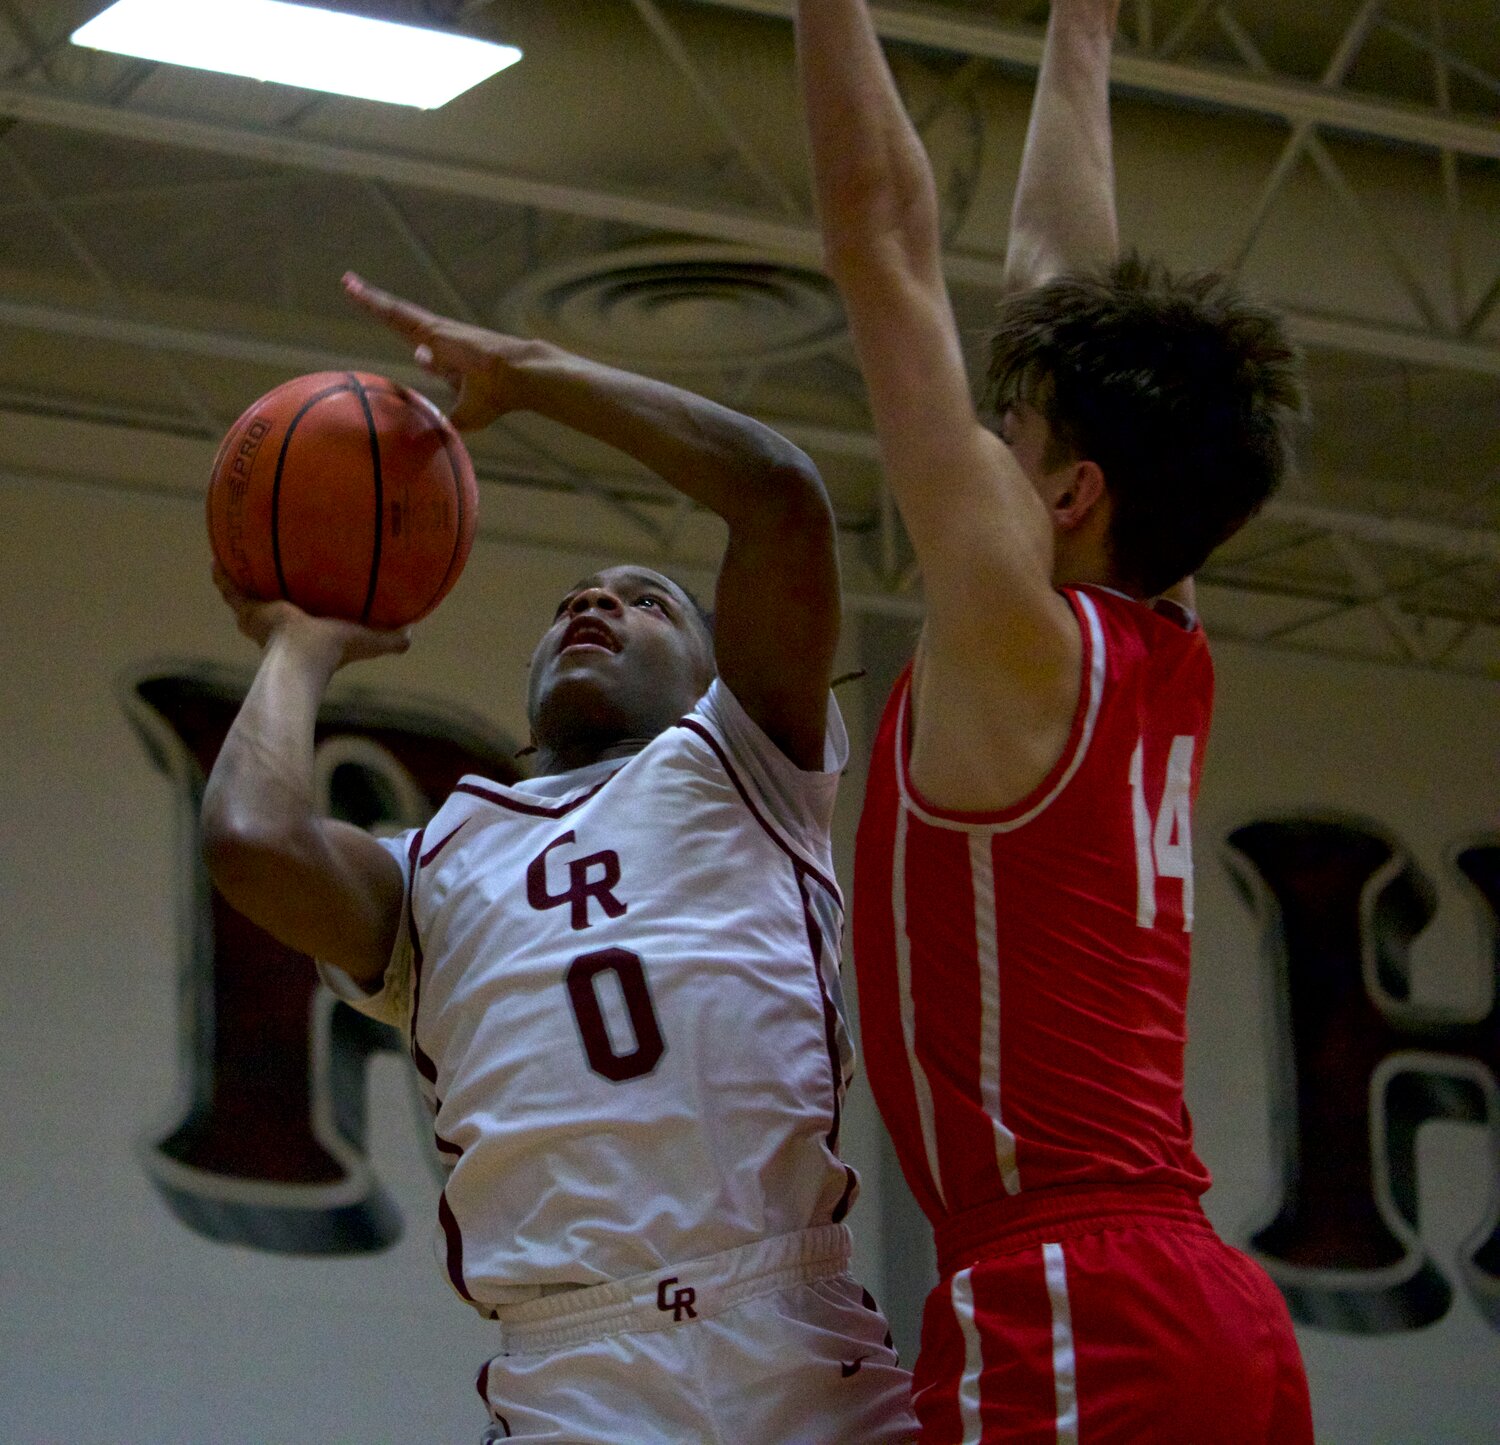 Prince Jones-Bynum shoots a layup during Wednesday’s game between Katy and Cinco Ranch at the Cinco Ranch gym.